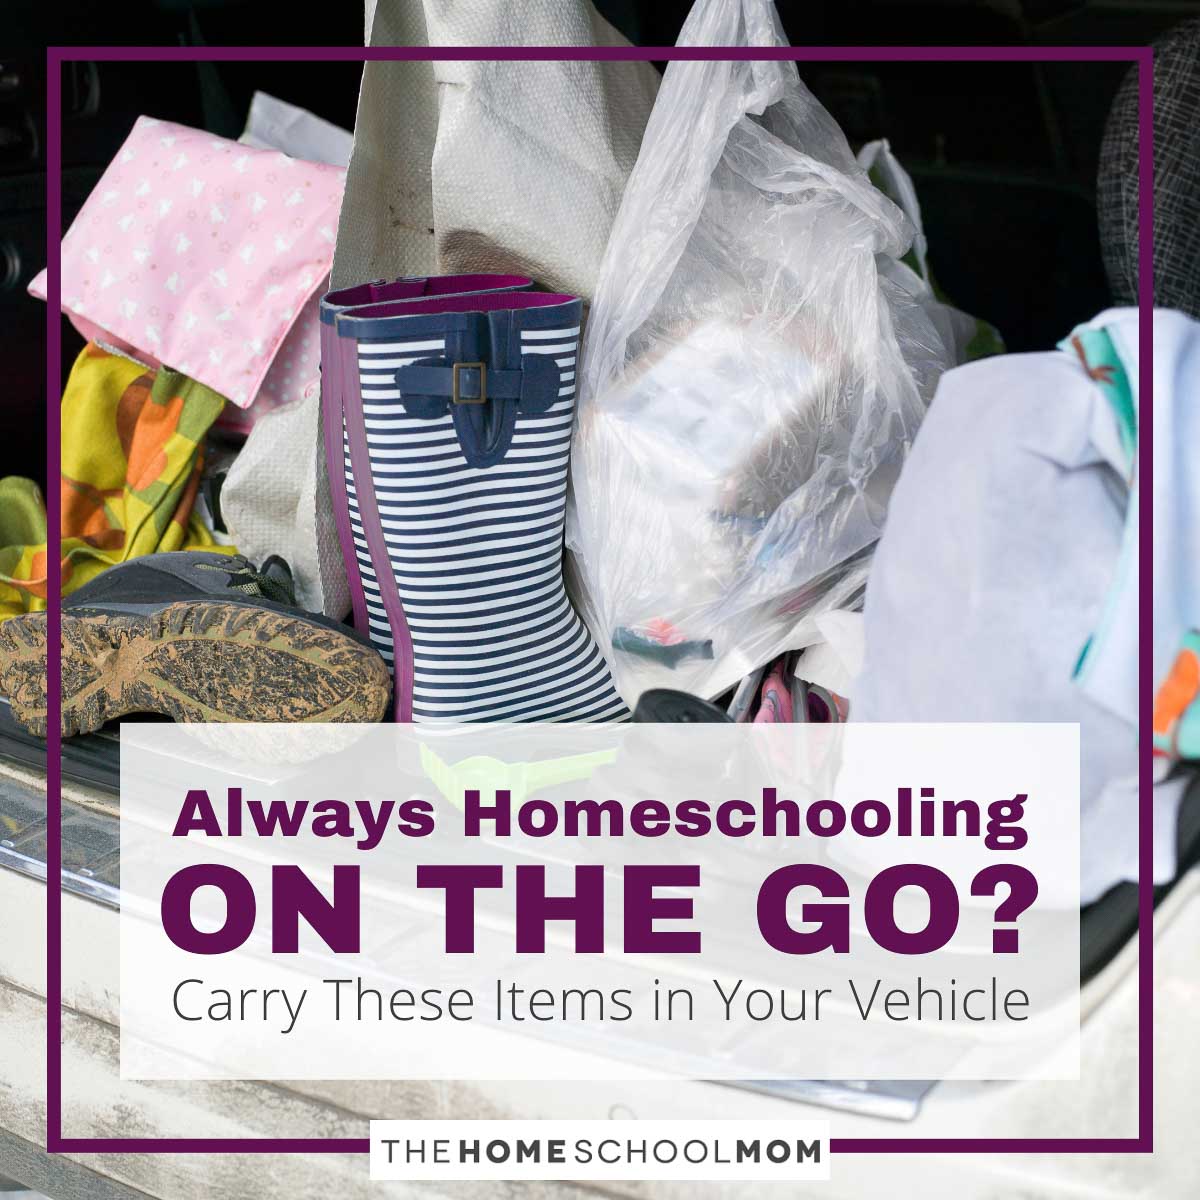 Always homeschooling on the go? Carry these items in your vehicle.